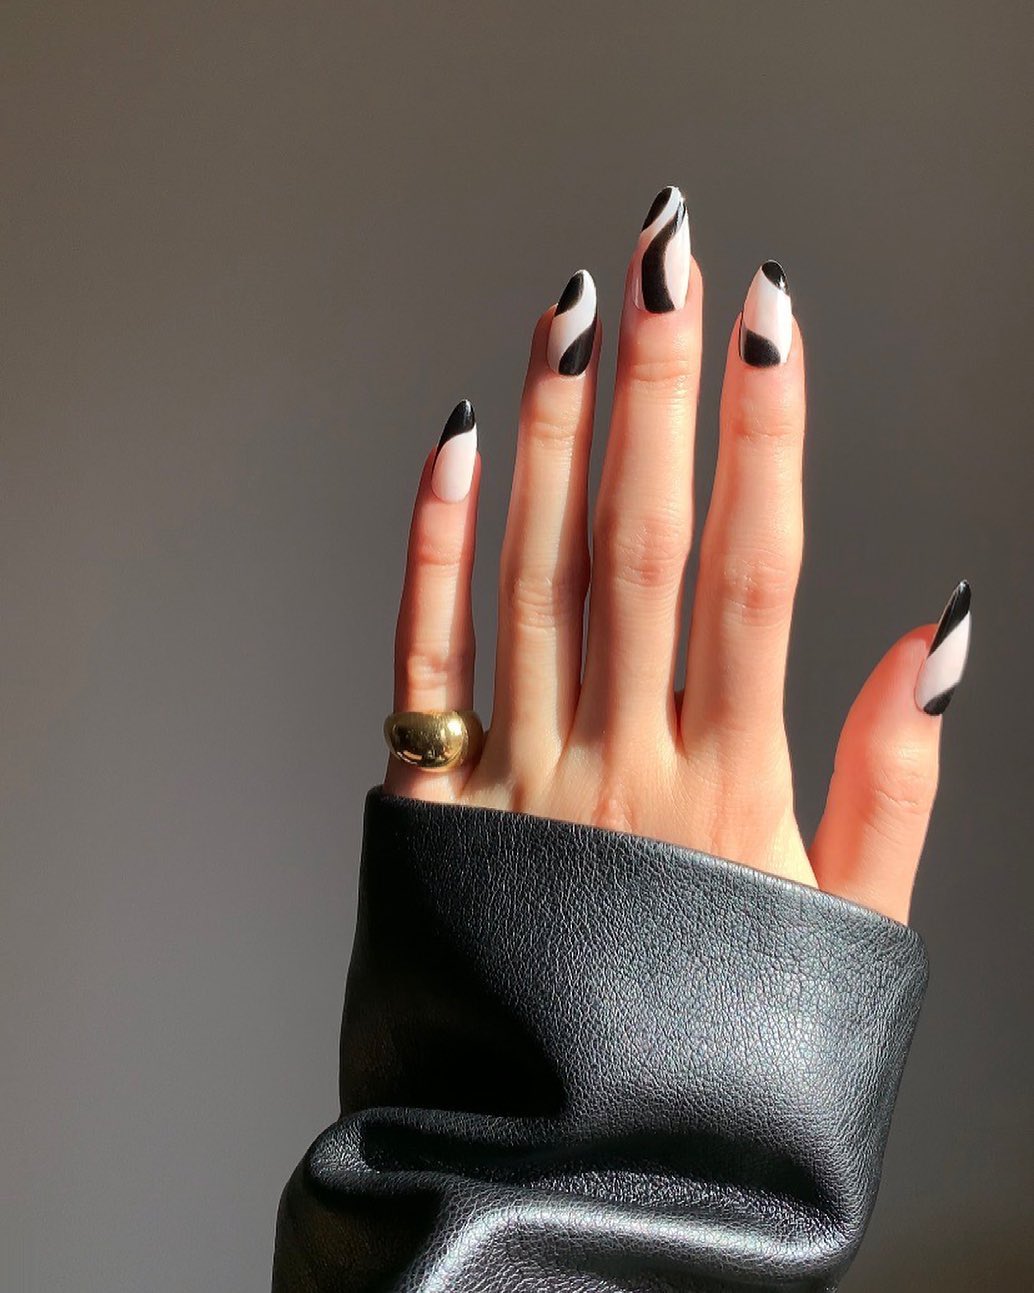 44 Latest Black Nail Designs To Try In 2023! - alexie